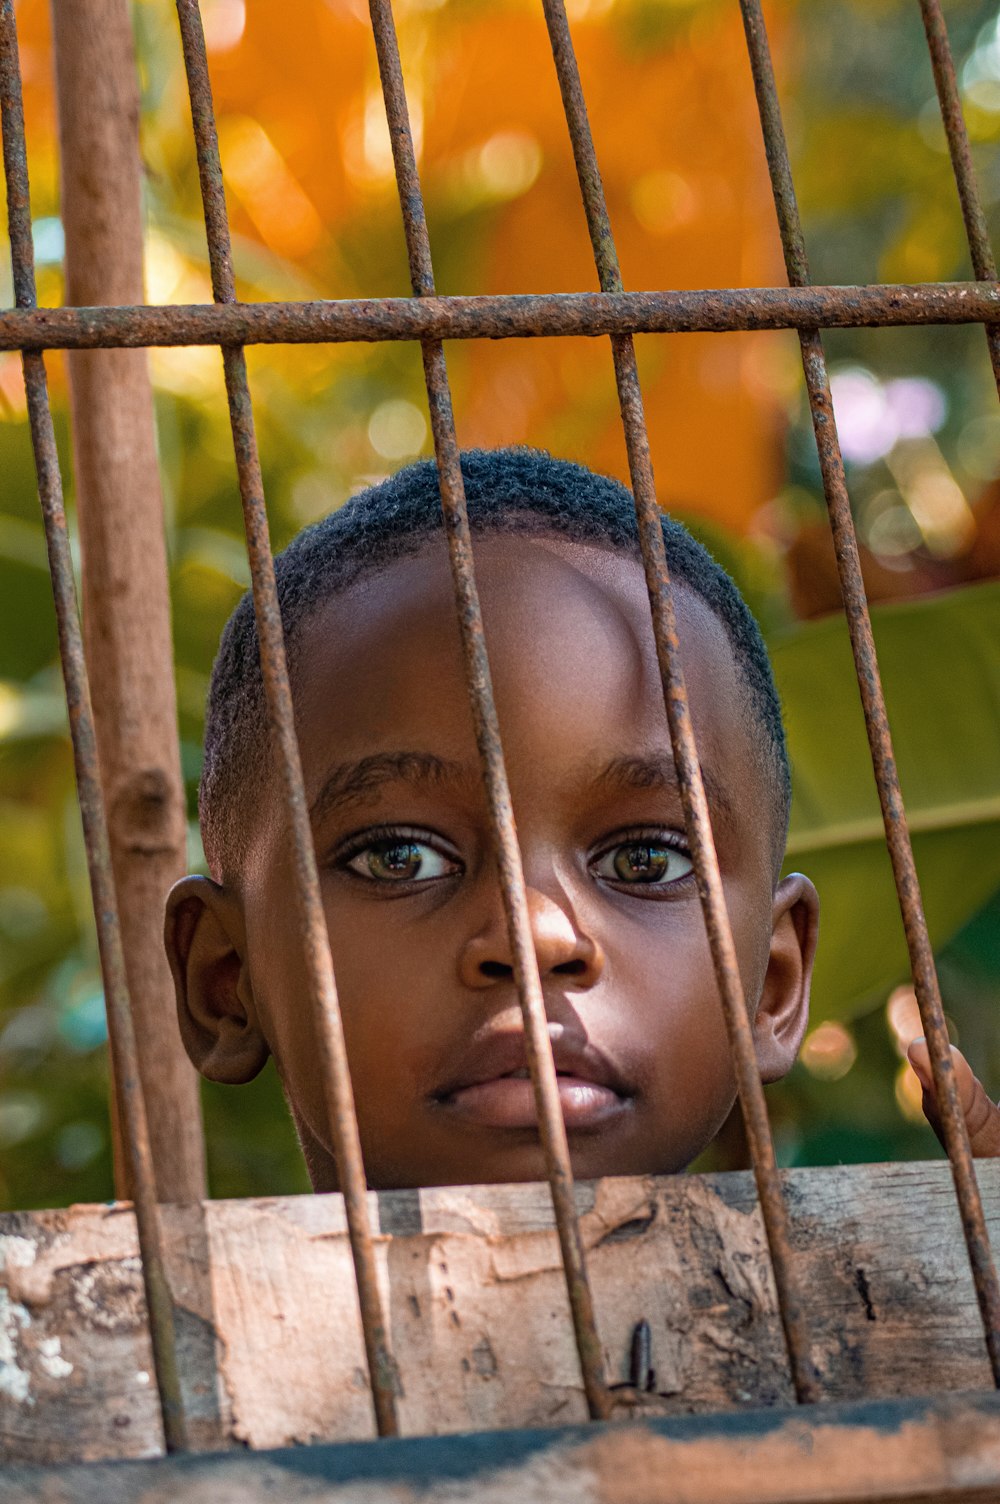 a young boy looks out from behind a fence